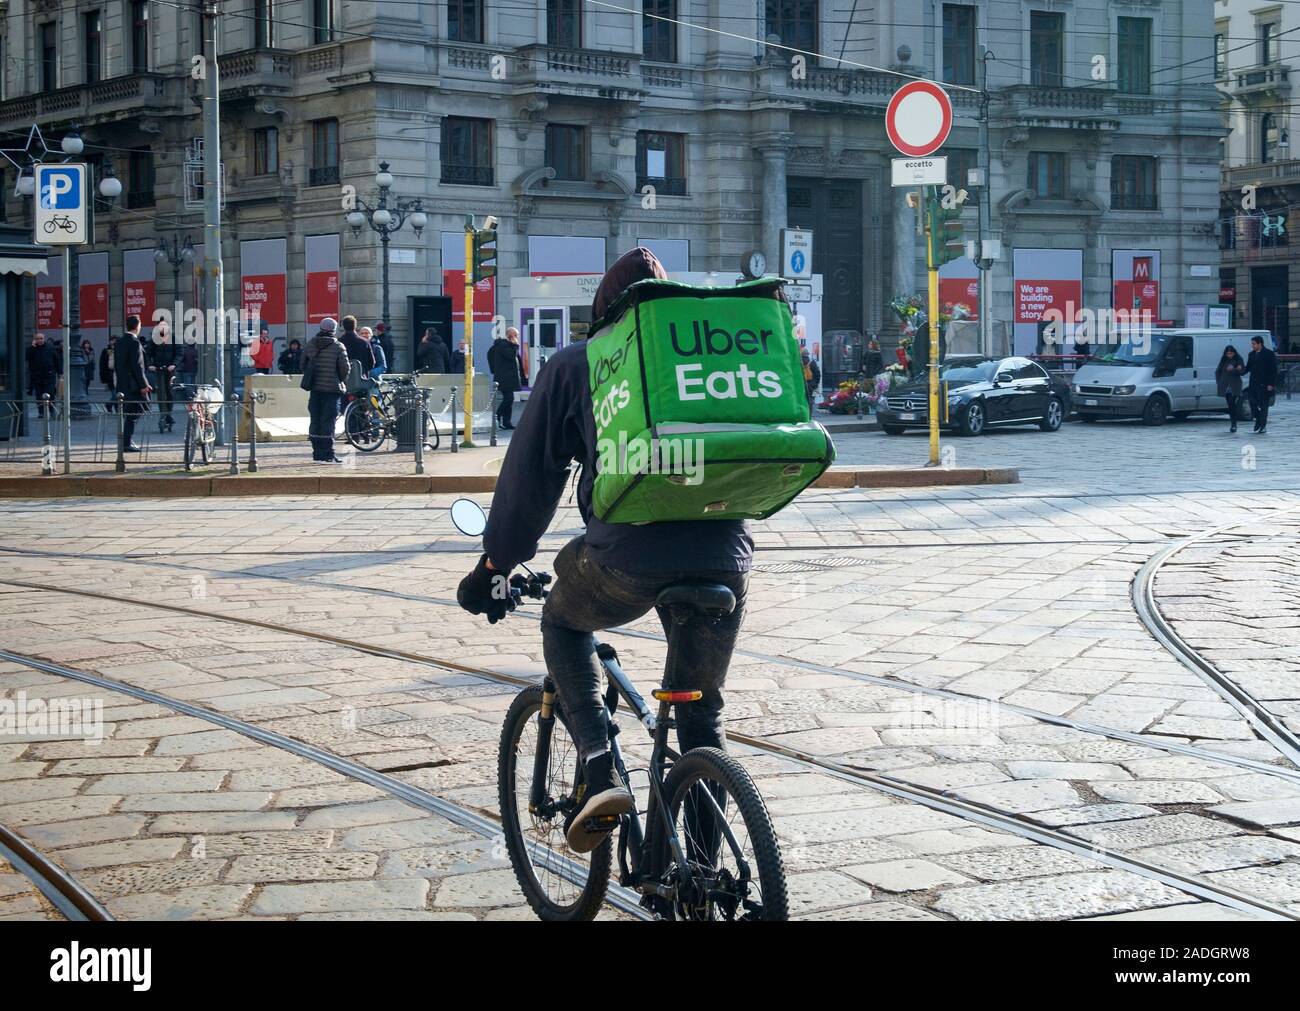 Uber Eats biker on the street in Milano running for a delivery, Italy Stock Photo